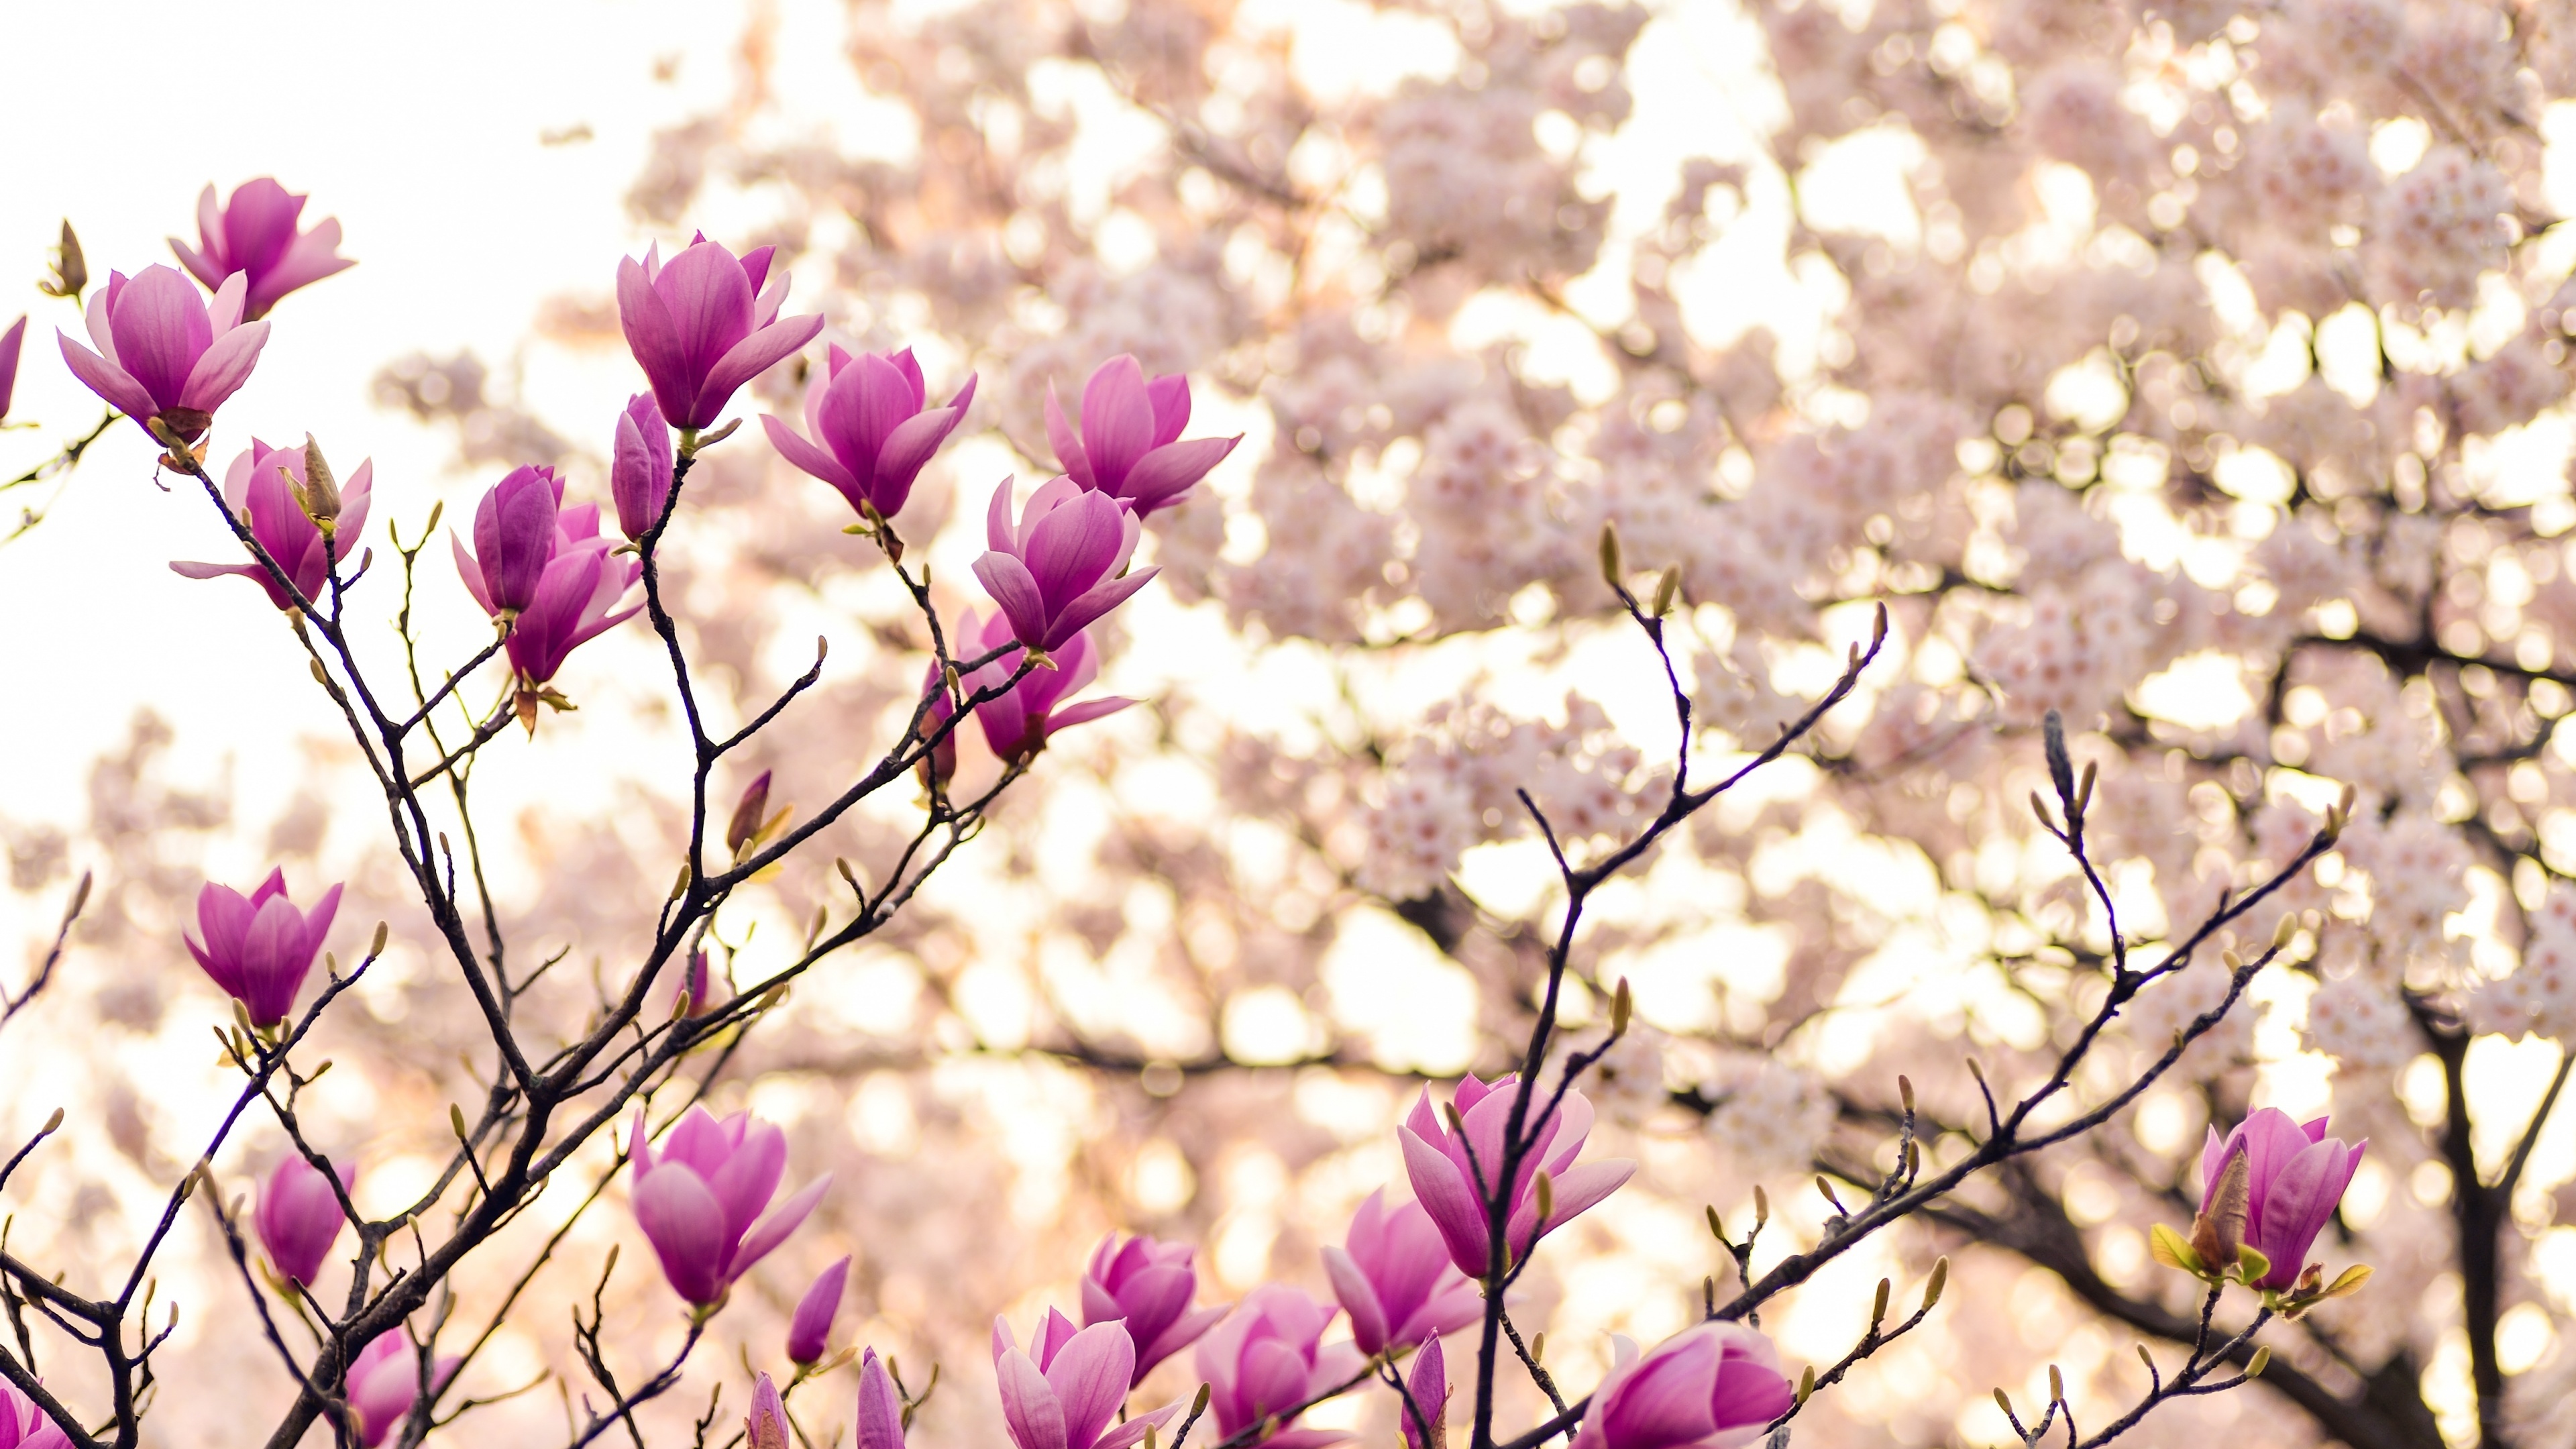 Purple magnolia blooms, Spring blossom beauty, Branches in bloom, Stunning flowers, 3840x2160 4K Desktop